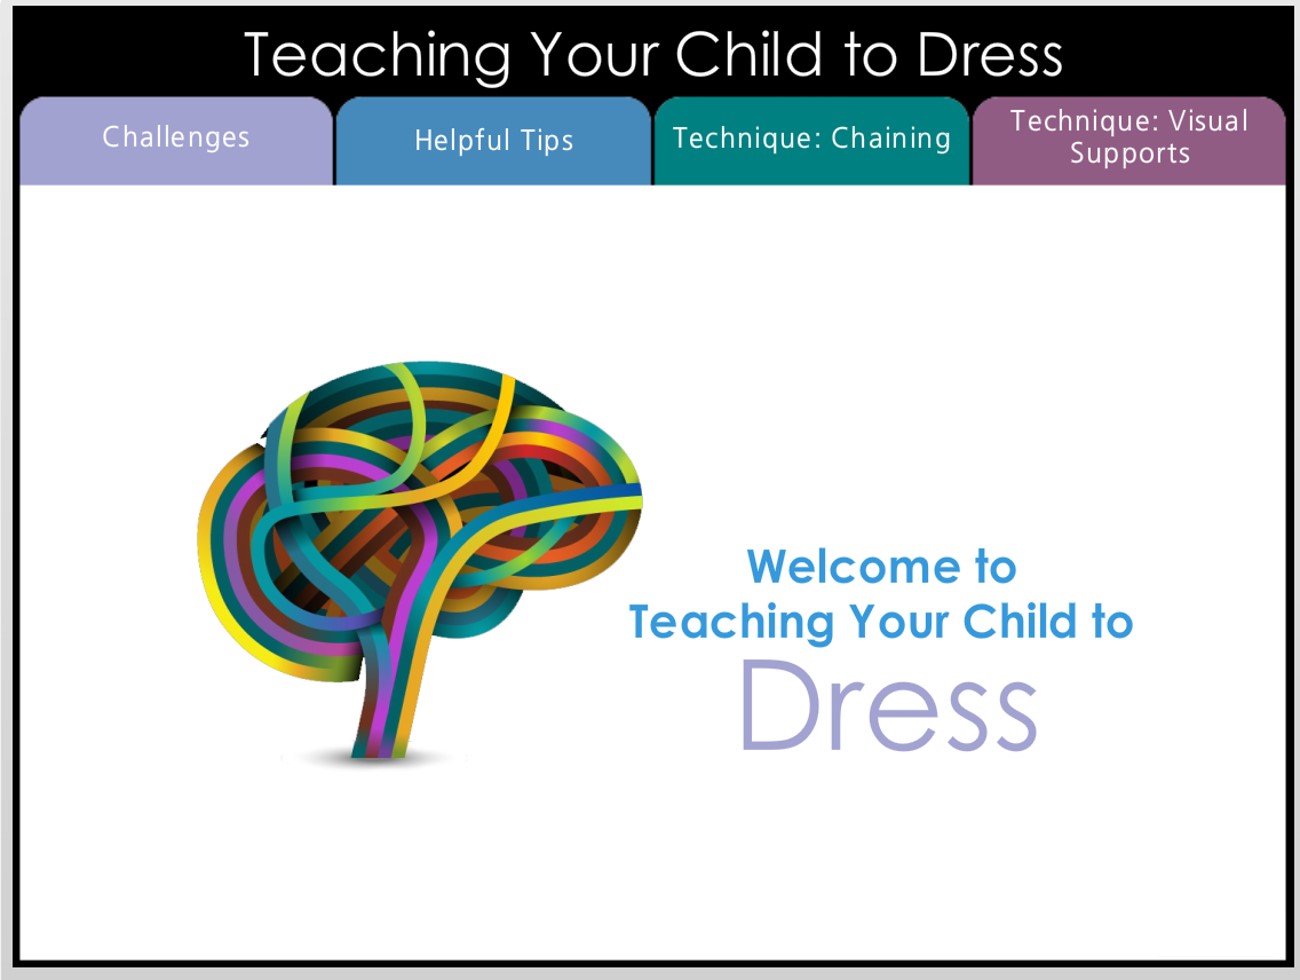 Teaching Your Child to Dress